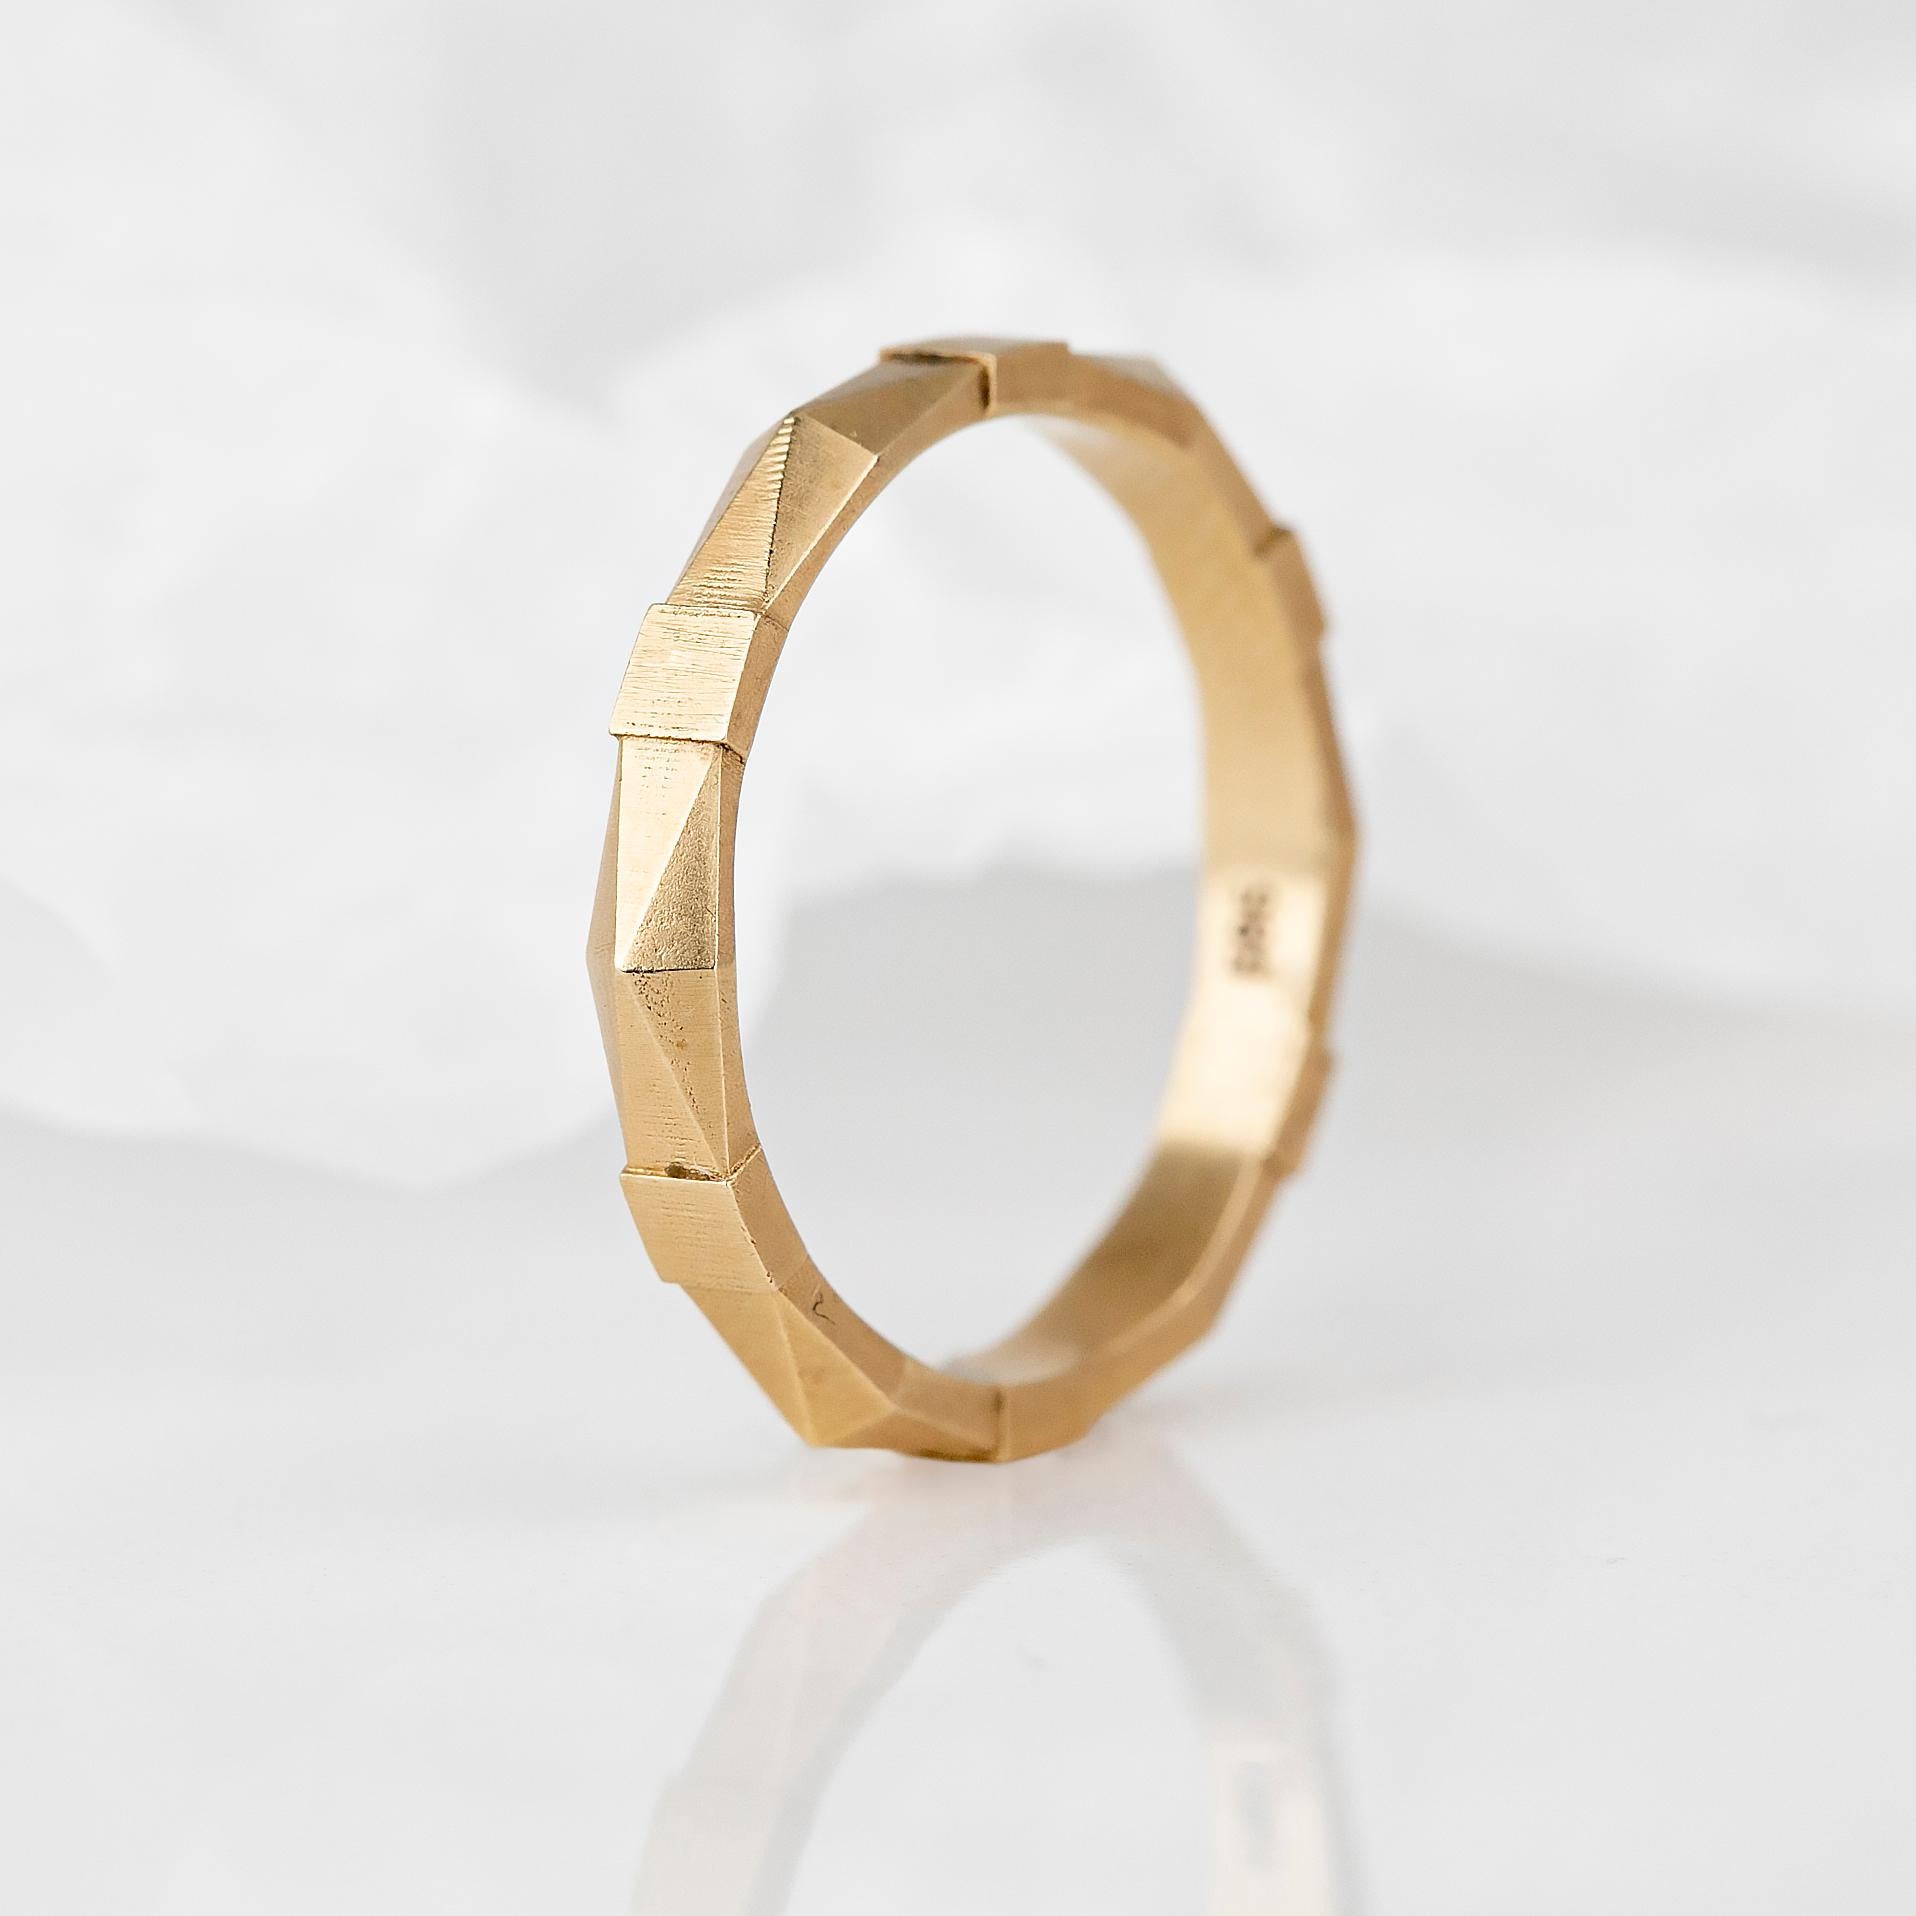 For Sale:  Vintage Style 14K Gold Geometrical Wedding Band for Men and Women 9